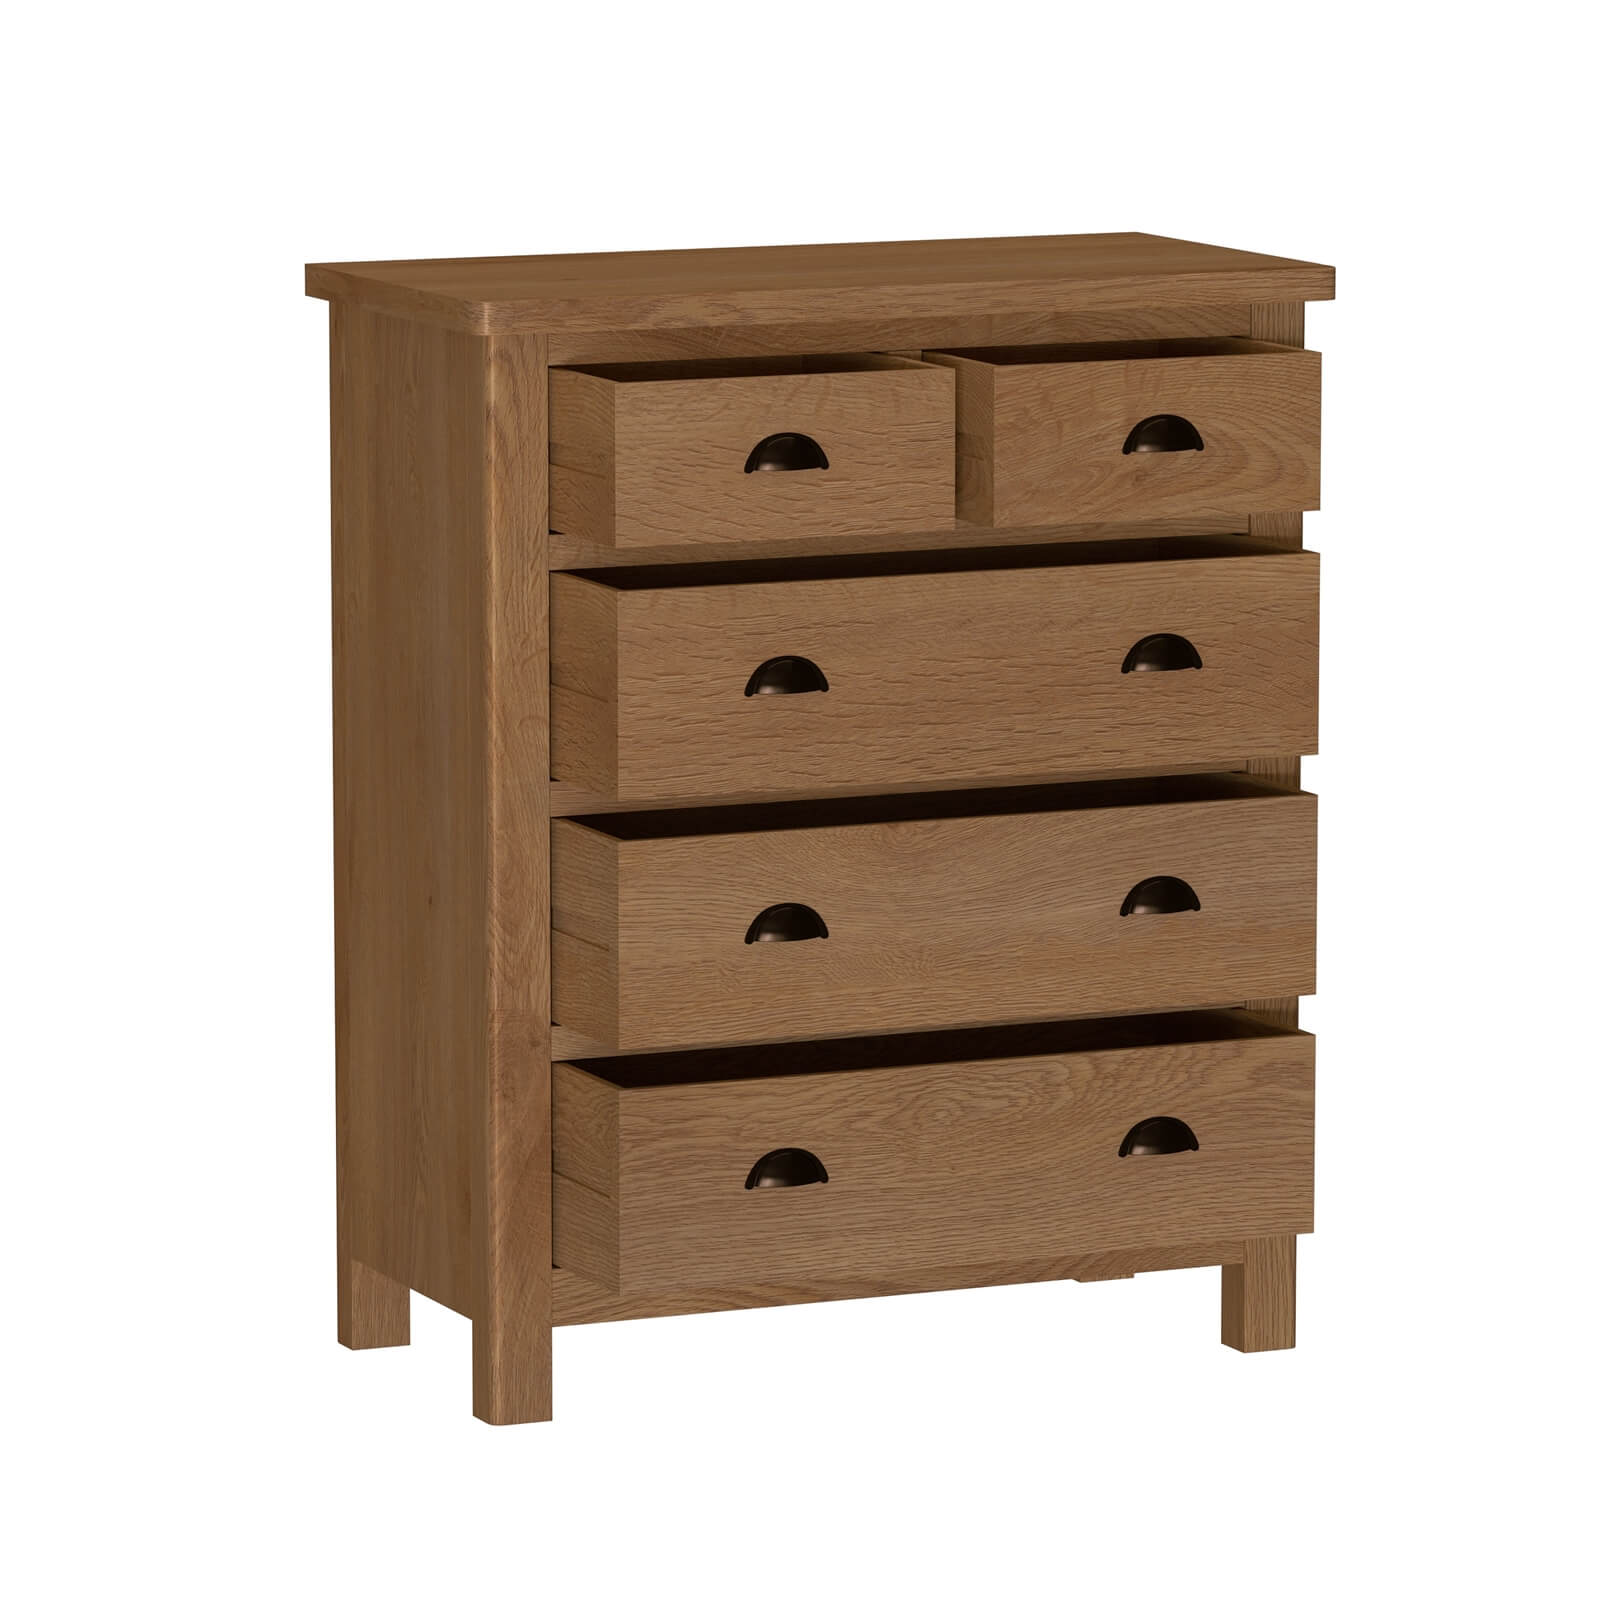 Newlyn 2 Over 3 Chest of Drawers - Oak